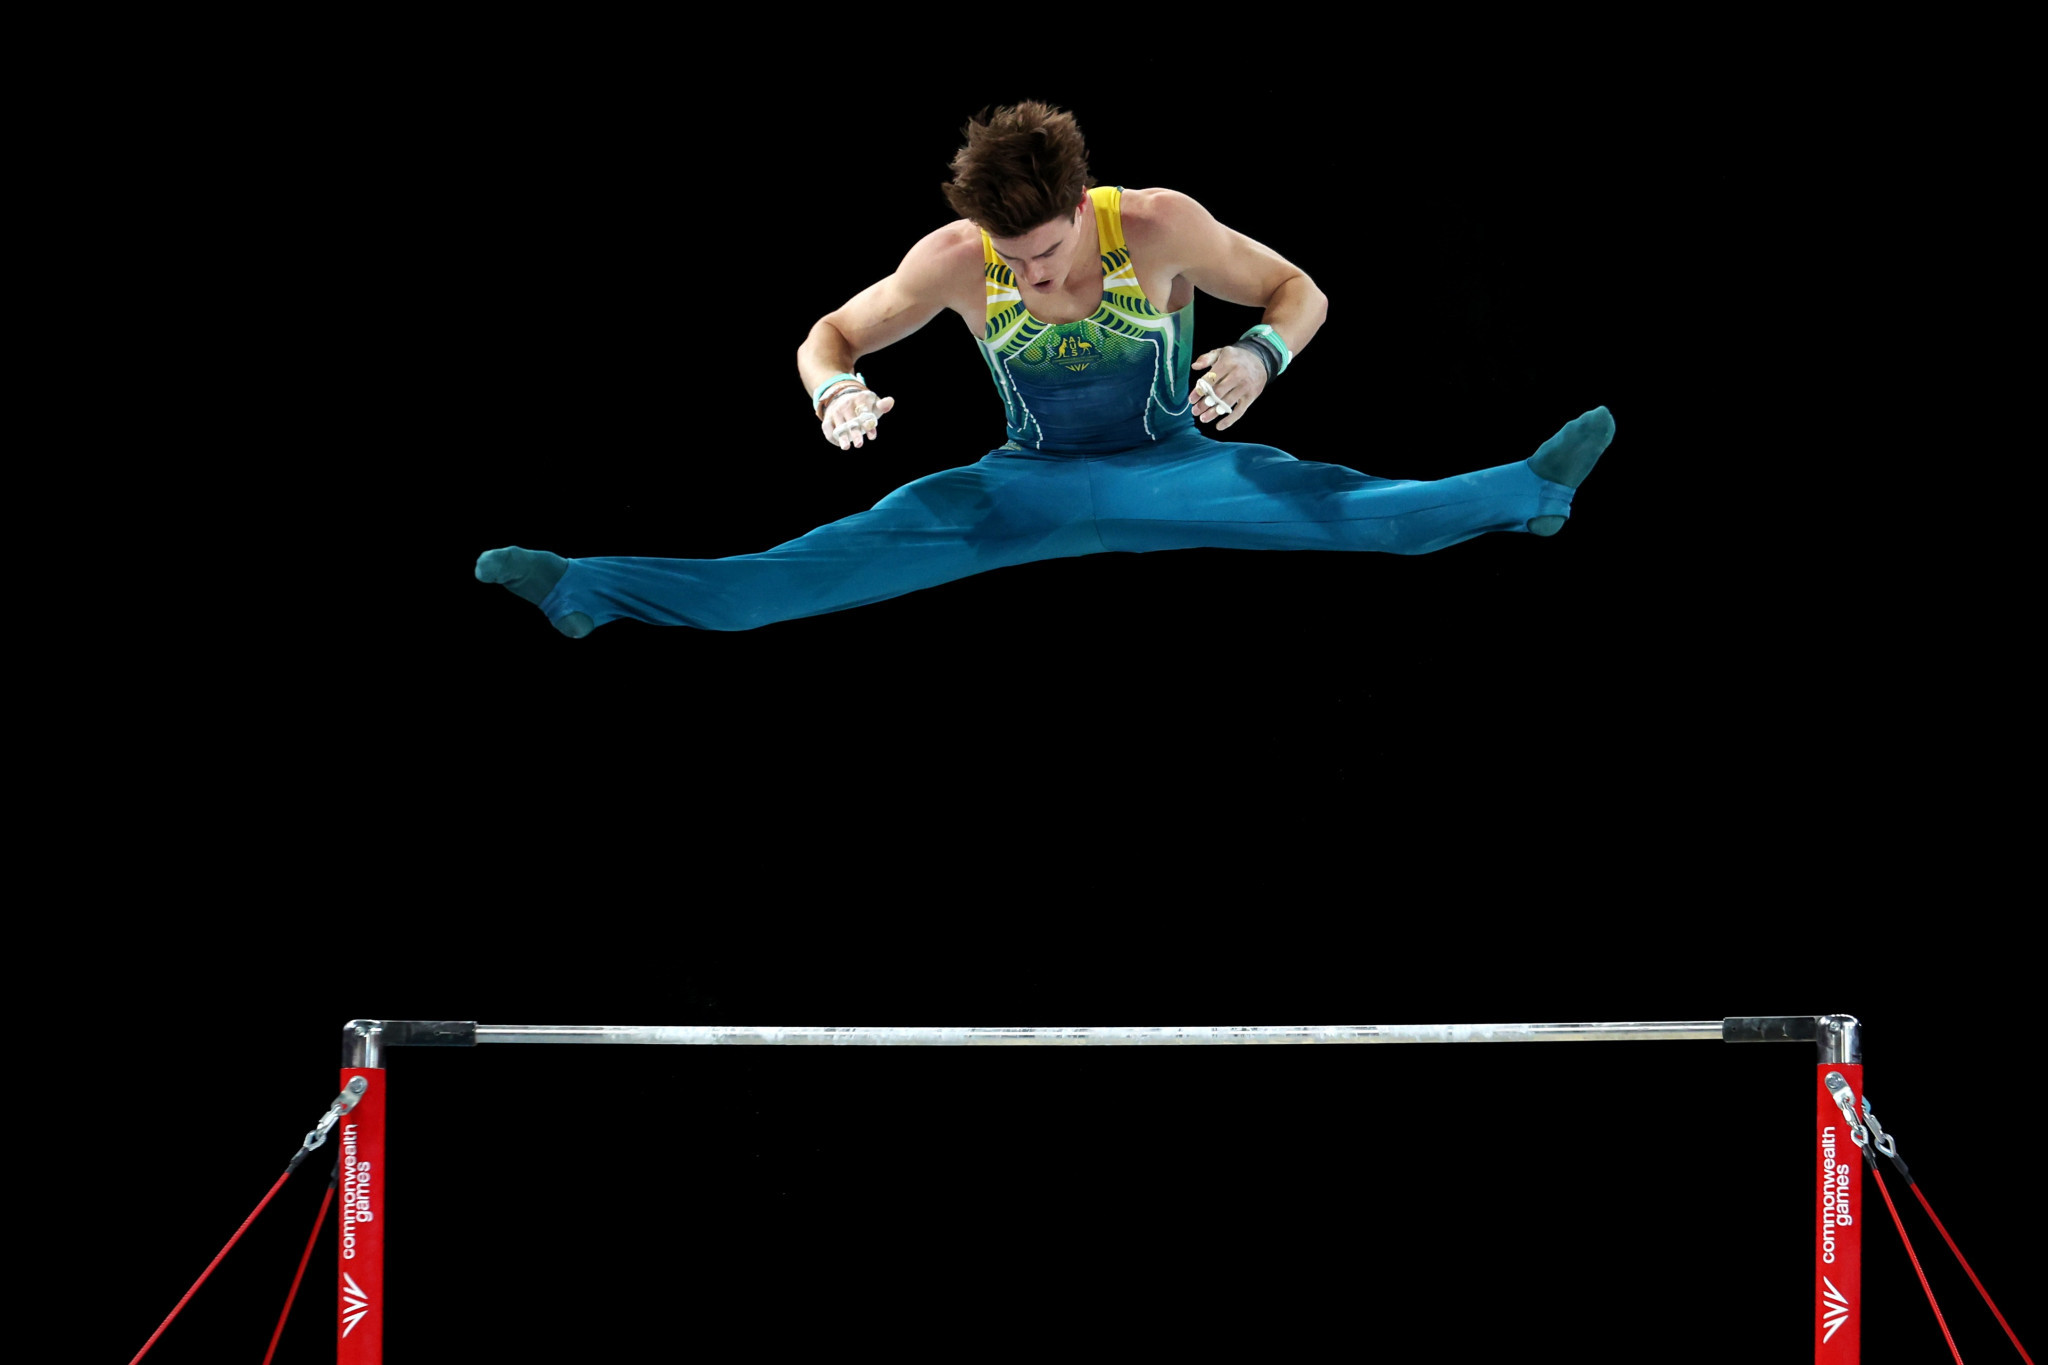 Artisitc gymnastics is one of several sports that is due to be held in Waurn Ponds ©Getty Images